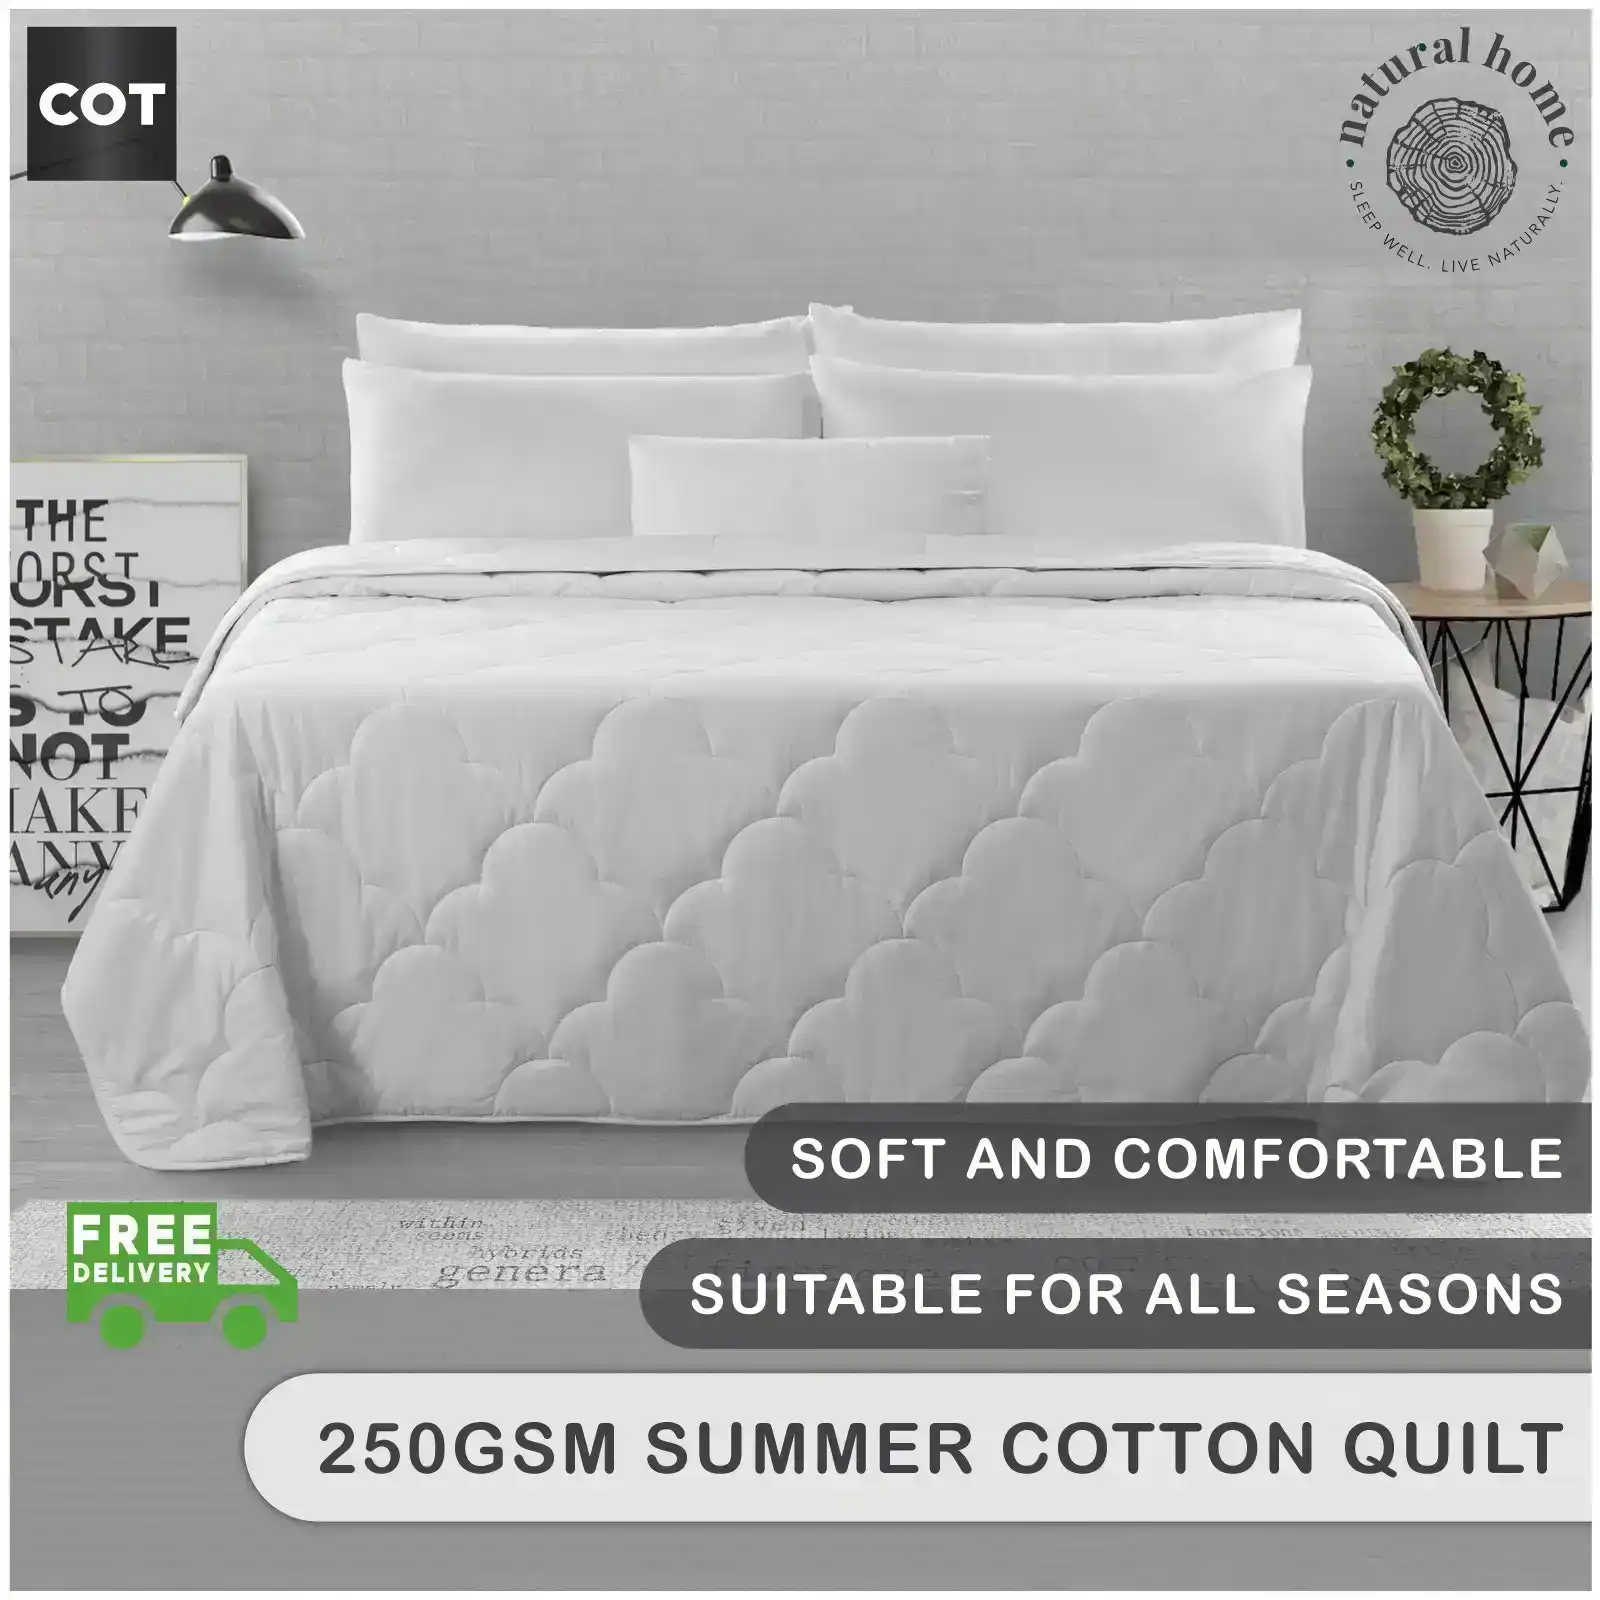 Natural Home Summer Cotton Quilt 250gsm - White - COT